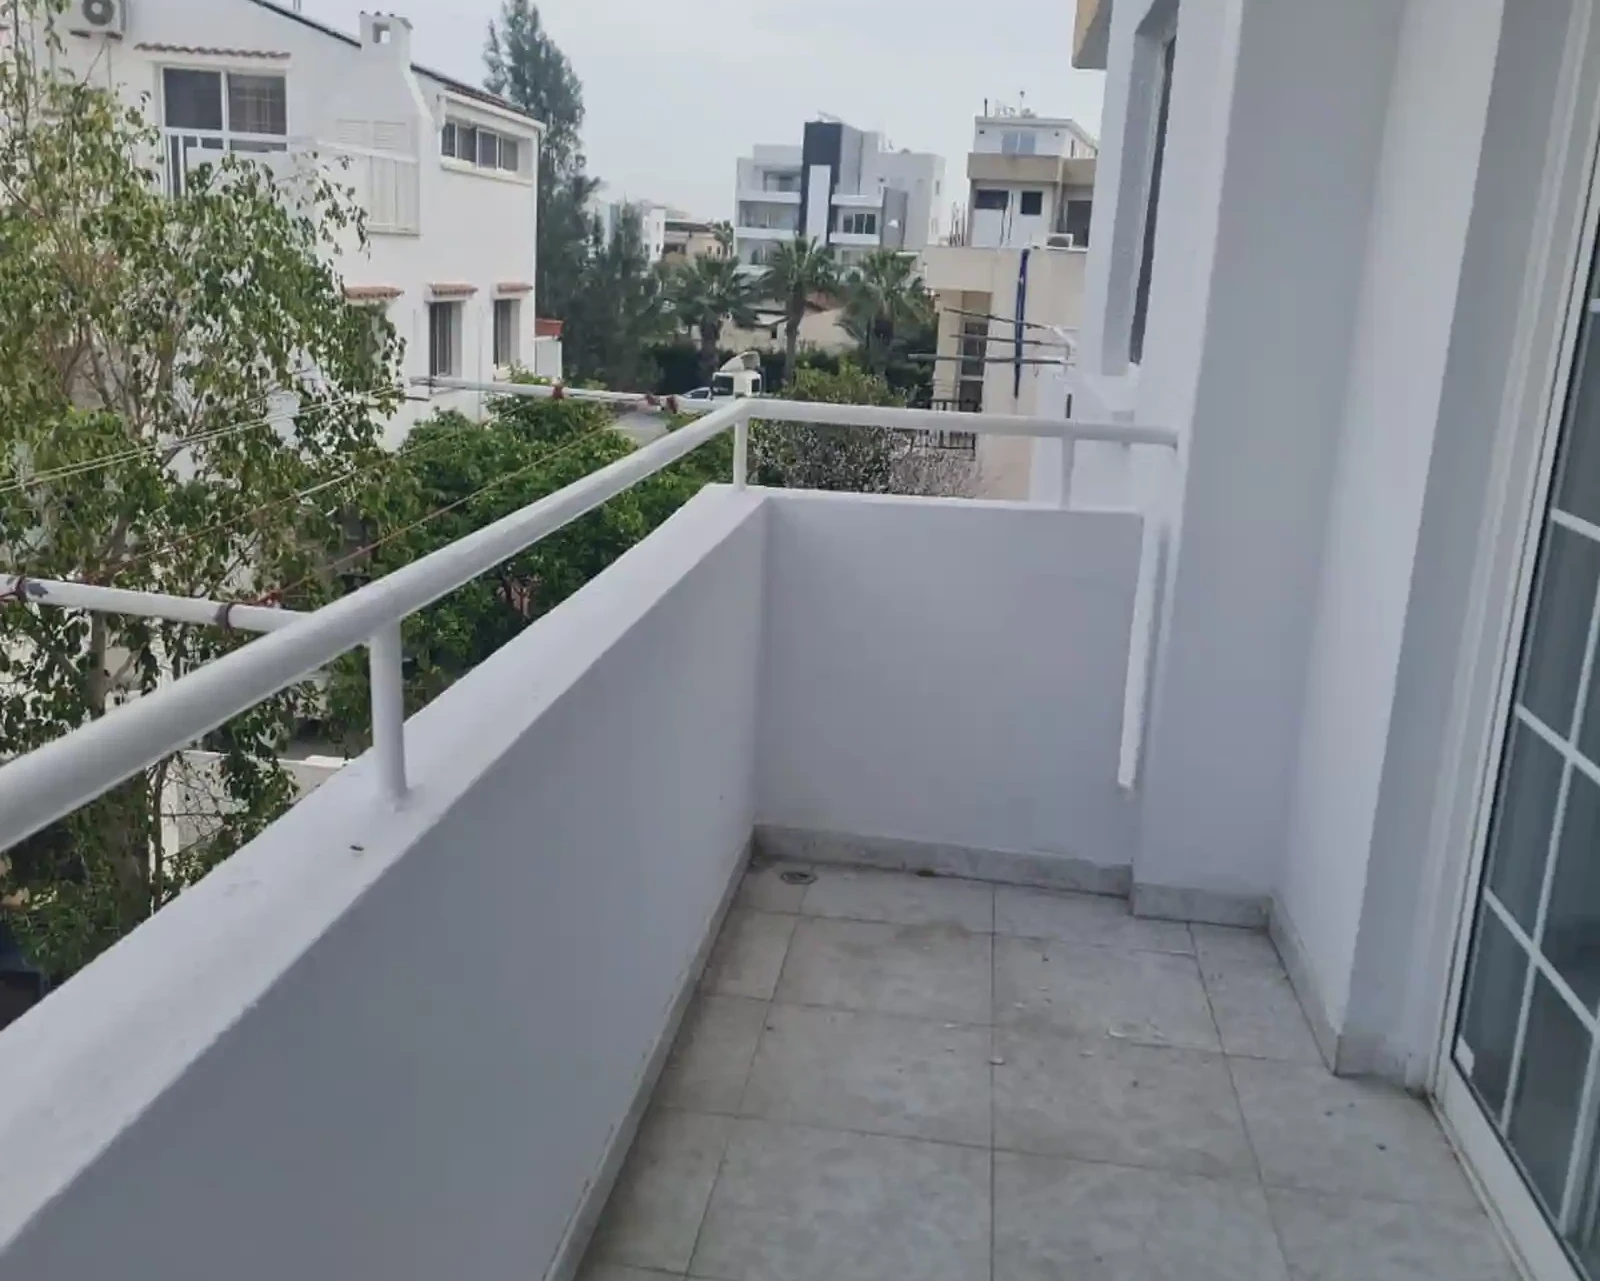 2-bedroom apartment fоr sаle €140.000, image 1